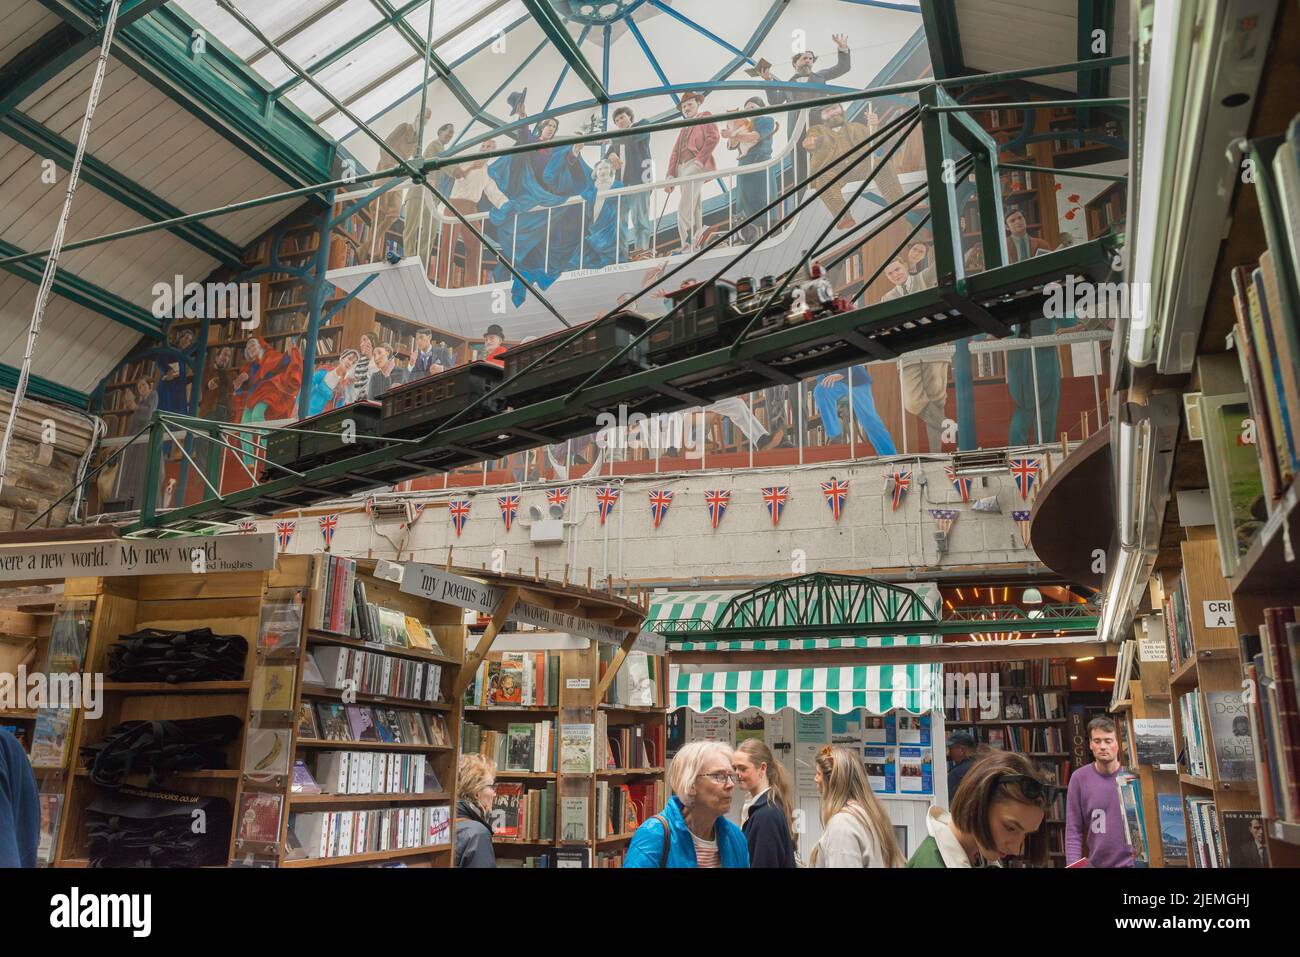 UK bookshop, view inside the famous Barter Books book shop in Alnwick with its working overhead model railway, Northumberland, England, UK Stock Photo